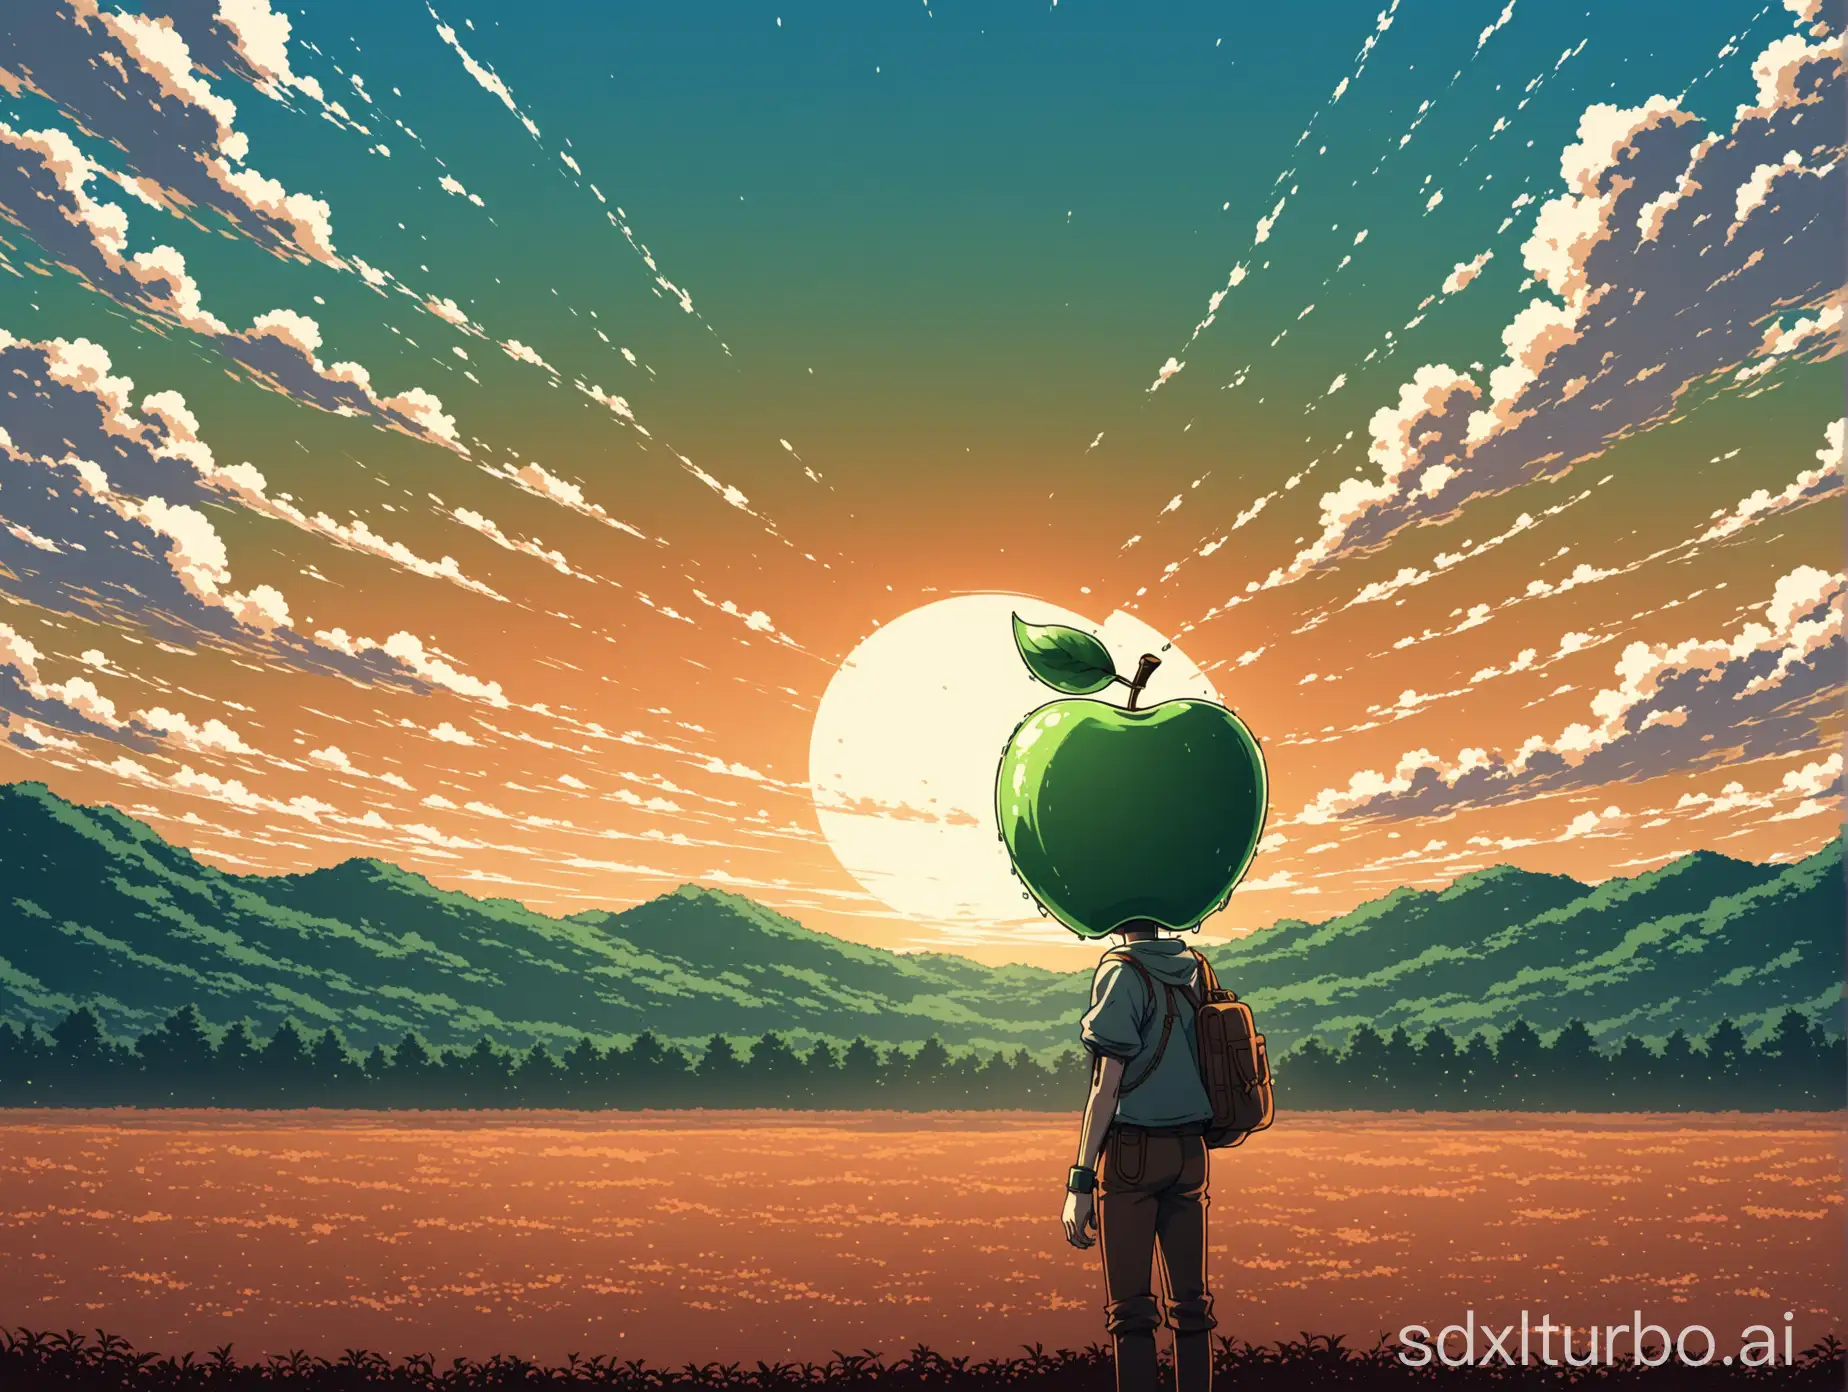 Exaggerated-2D-Anime-Style-Illustration-of-Oxidizing-Apple